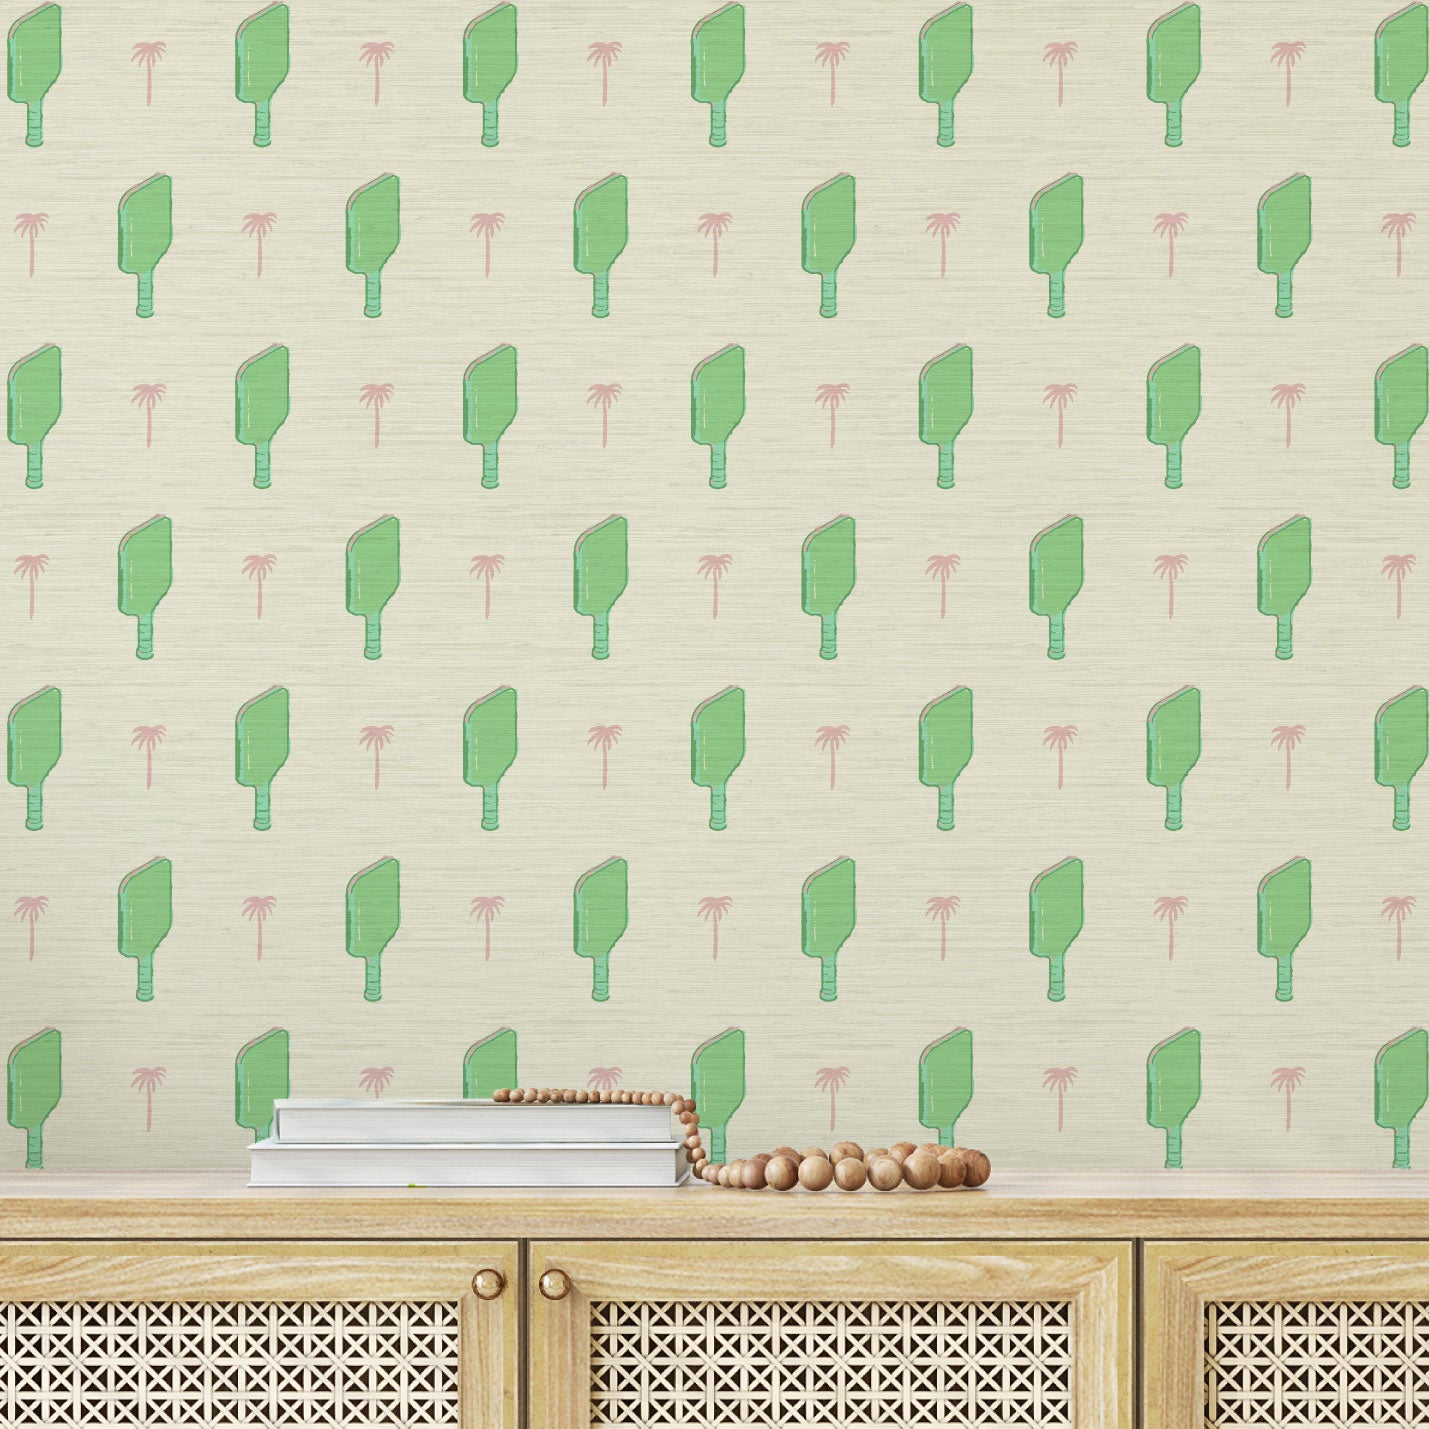 Grasscloth wallpaper Natural Textured Eco-Friendly Non-toxic High-quality  Sustainable Interior Design Bold Custom Tailor-made Retro chic Grand millennial Maximalism  Traditional Dopamine decor tropical palm tree pickleball paddles sports neutral playroom kids paddles green pink palm trees